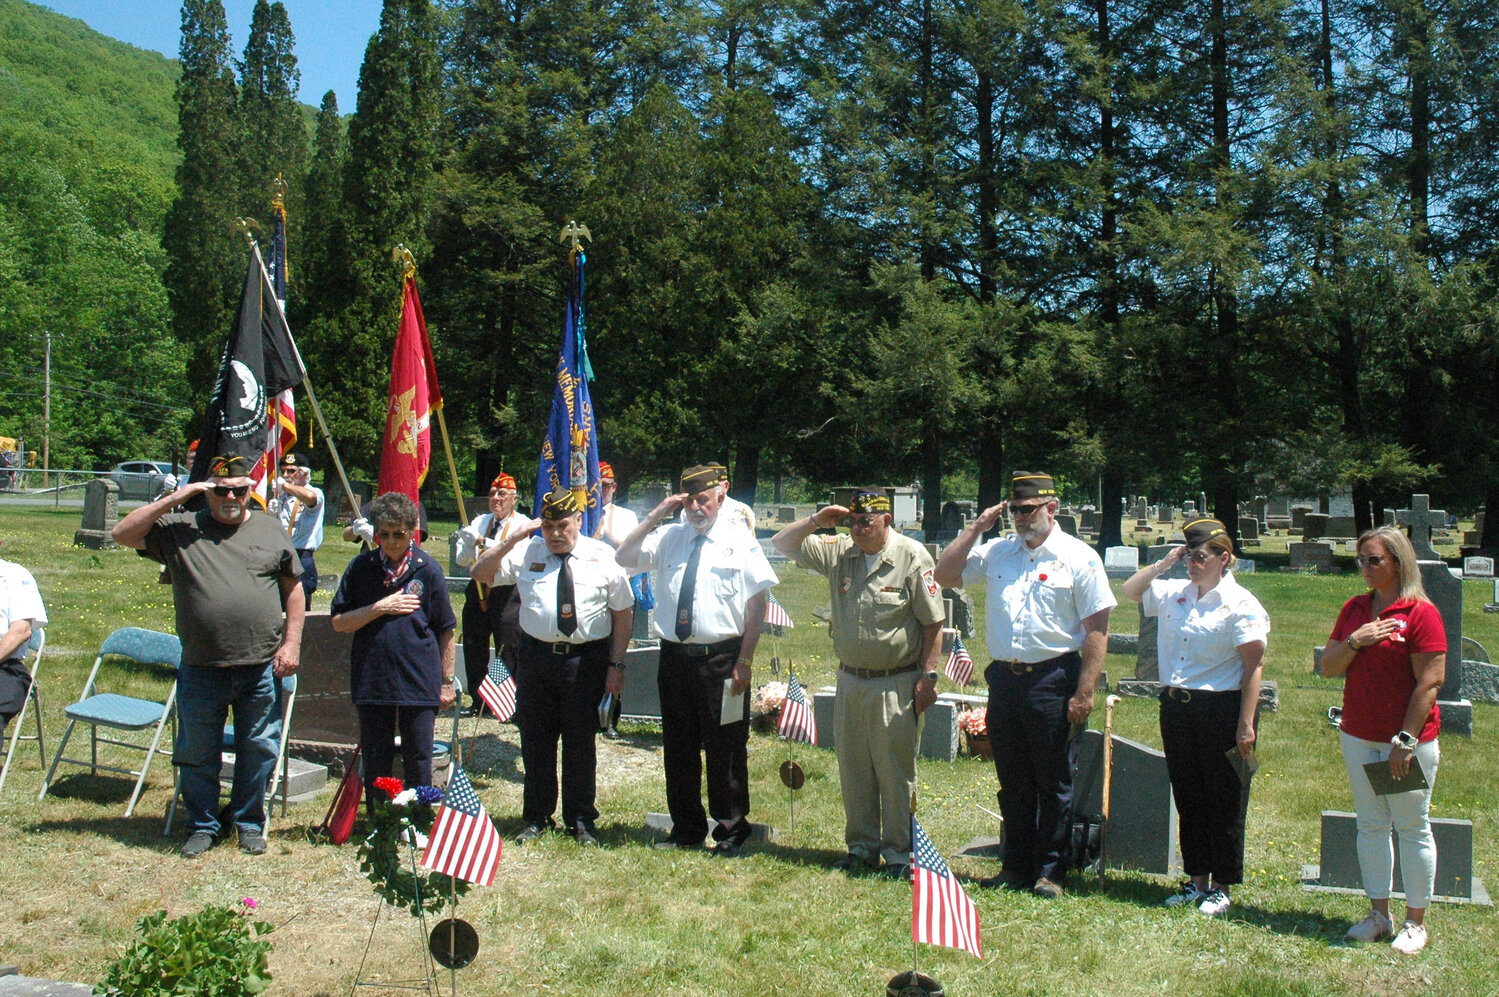 Members of Allan Milk Memorial VFW Post 7276 salute to the ceremonial bouquet after placing each item down one by one. From left to right, Mike Ristics (aka Bugman); Kathy Geosits; Bruce Pesci; Frank Geosits; Art Flynn; Chris Roman; Lauren Roman; and Amber Sullivan, Auxiliary President.